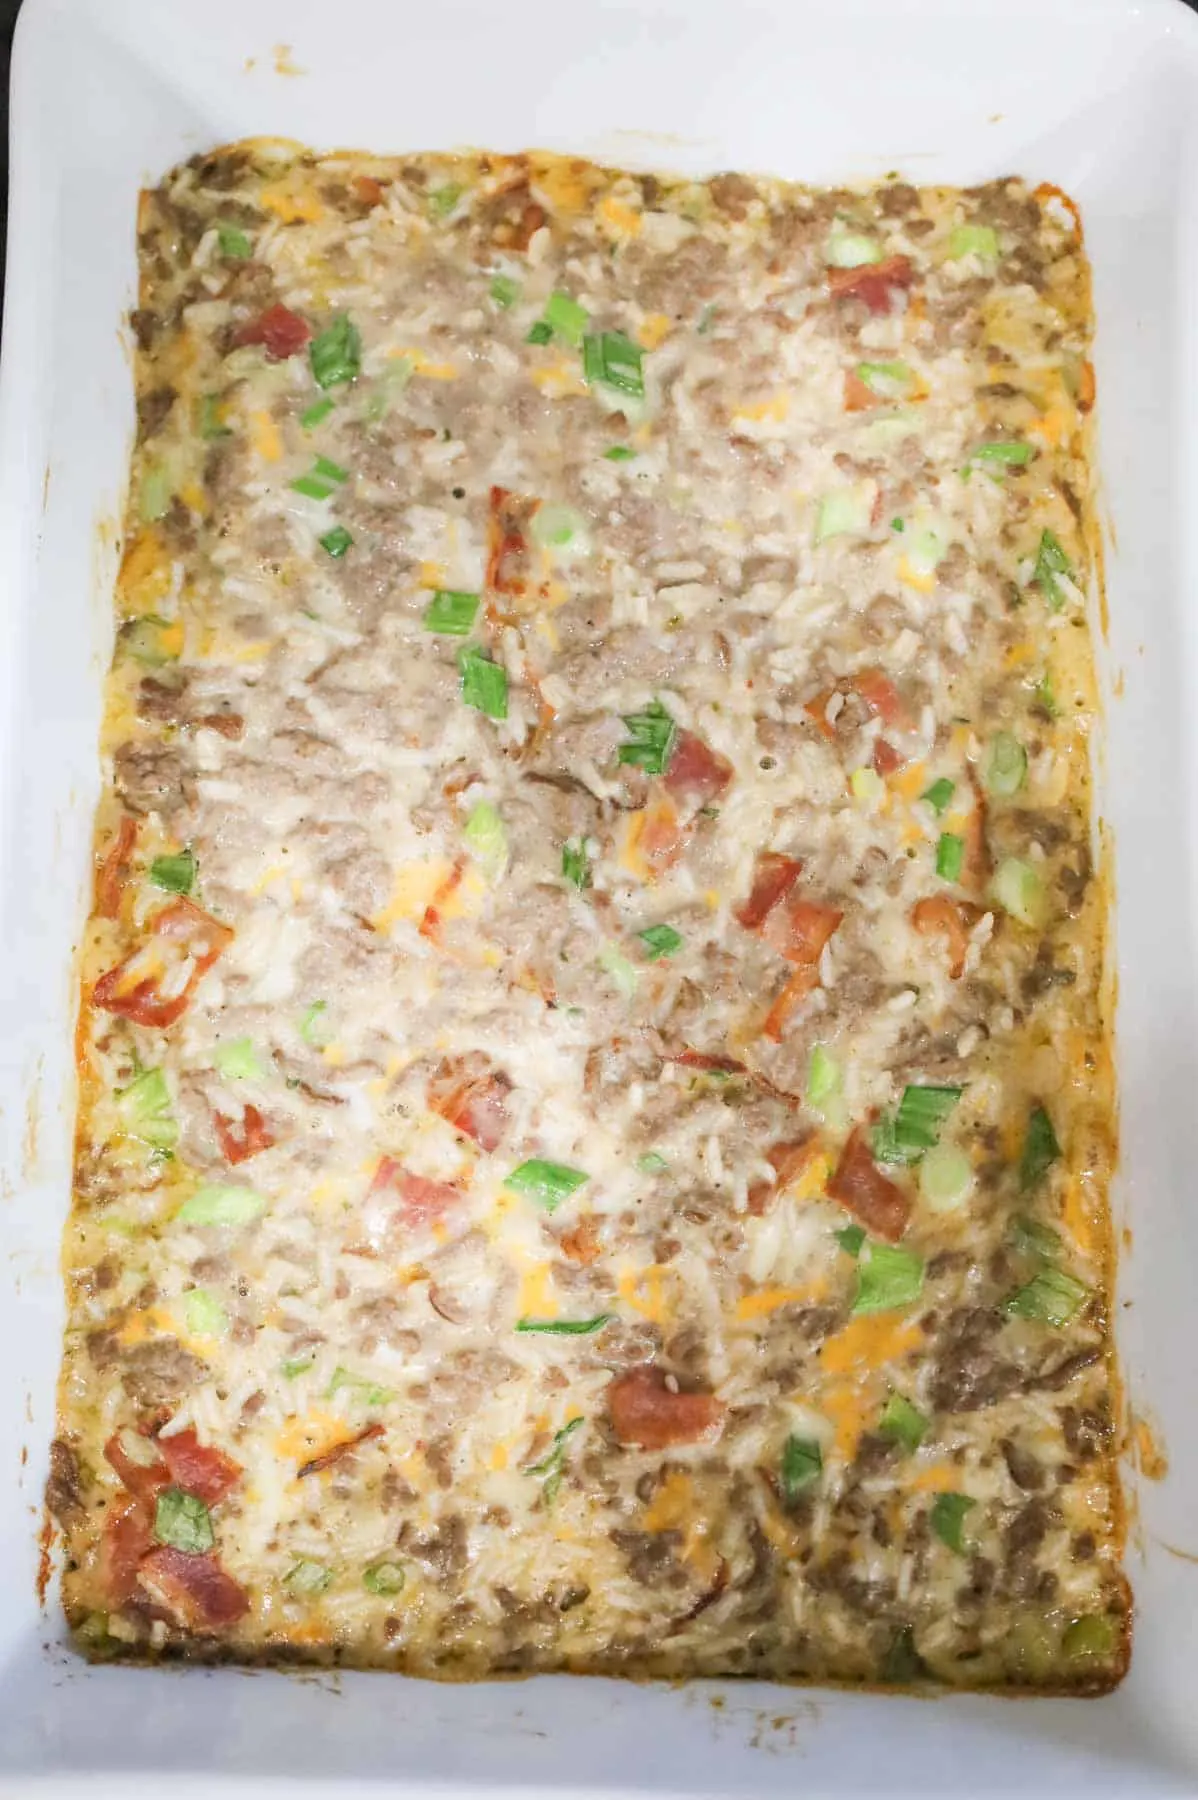 cheesy ground beef and rice mixture in a casserole dish after baking